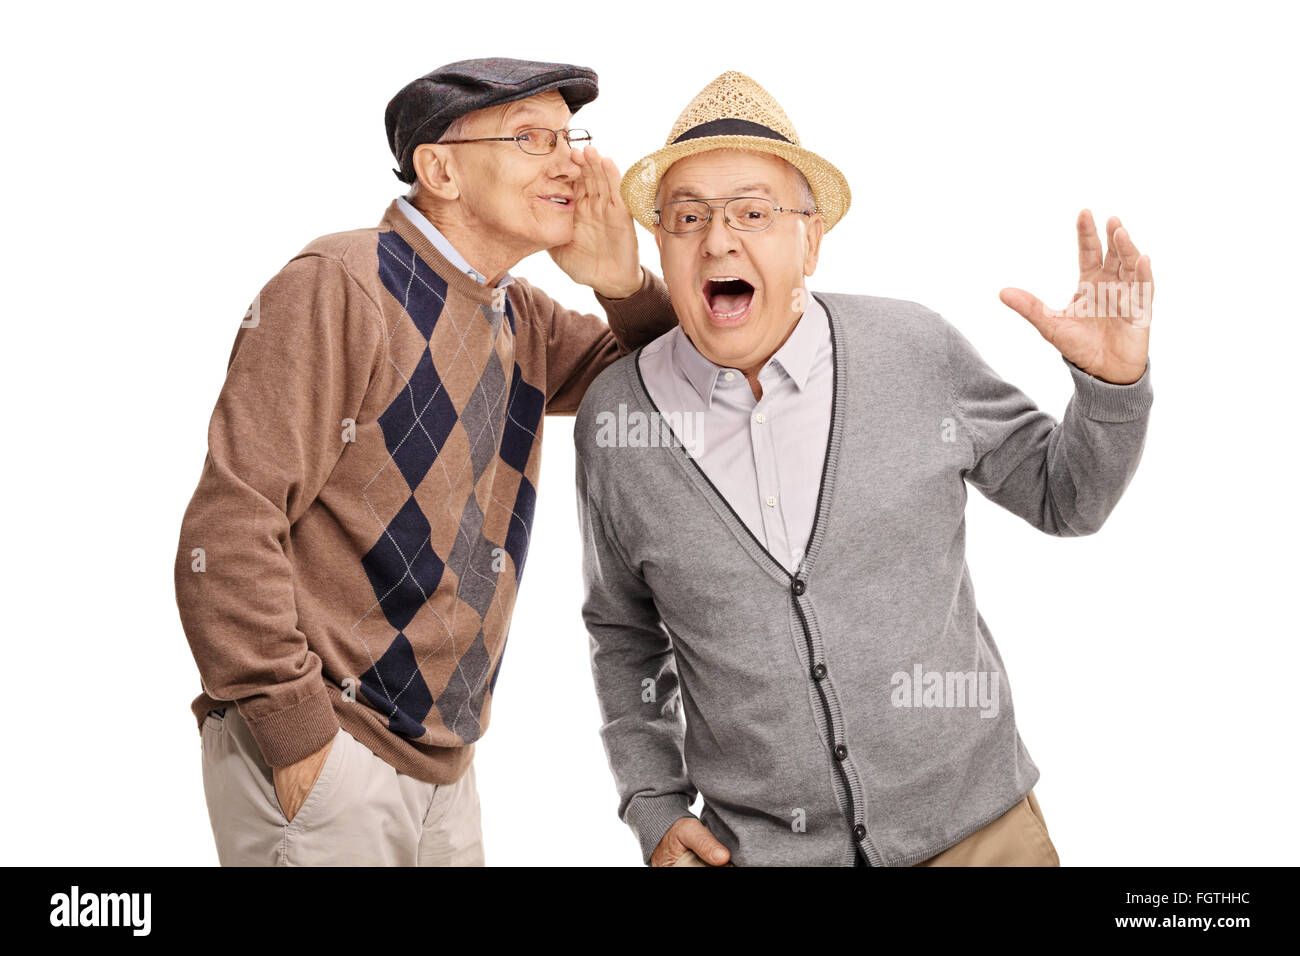 Senior man whispering something to his friend and laughing together isolated on white background Stock Photo